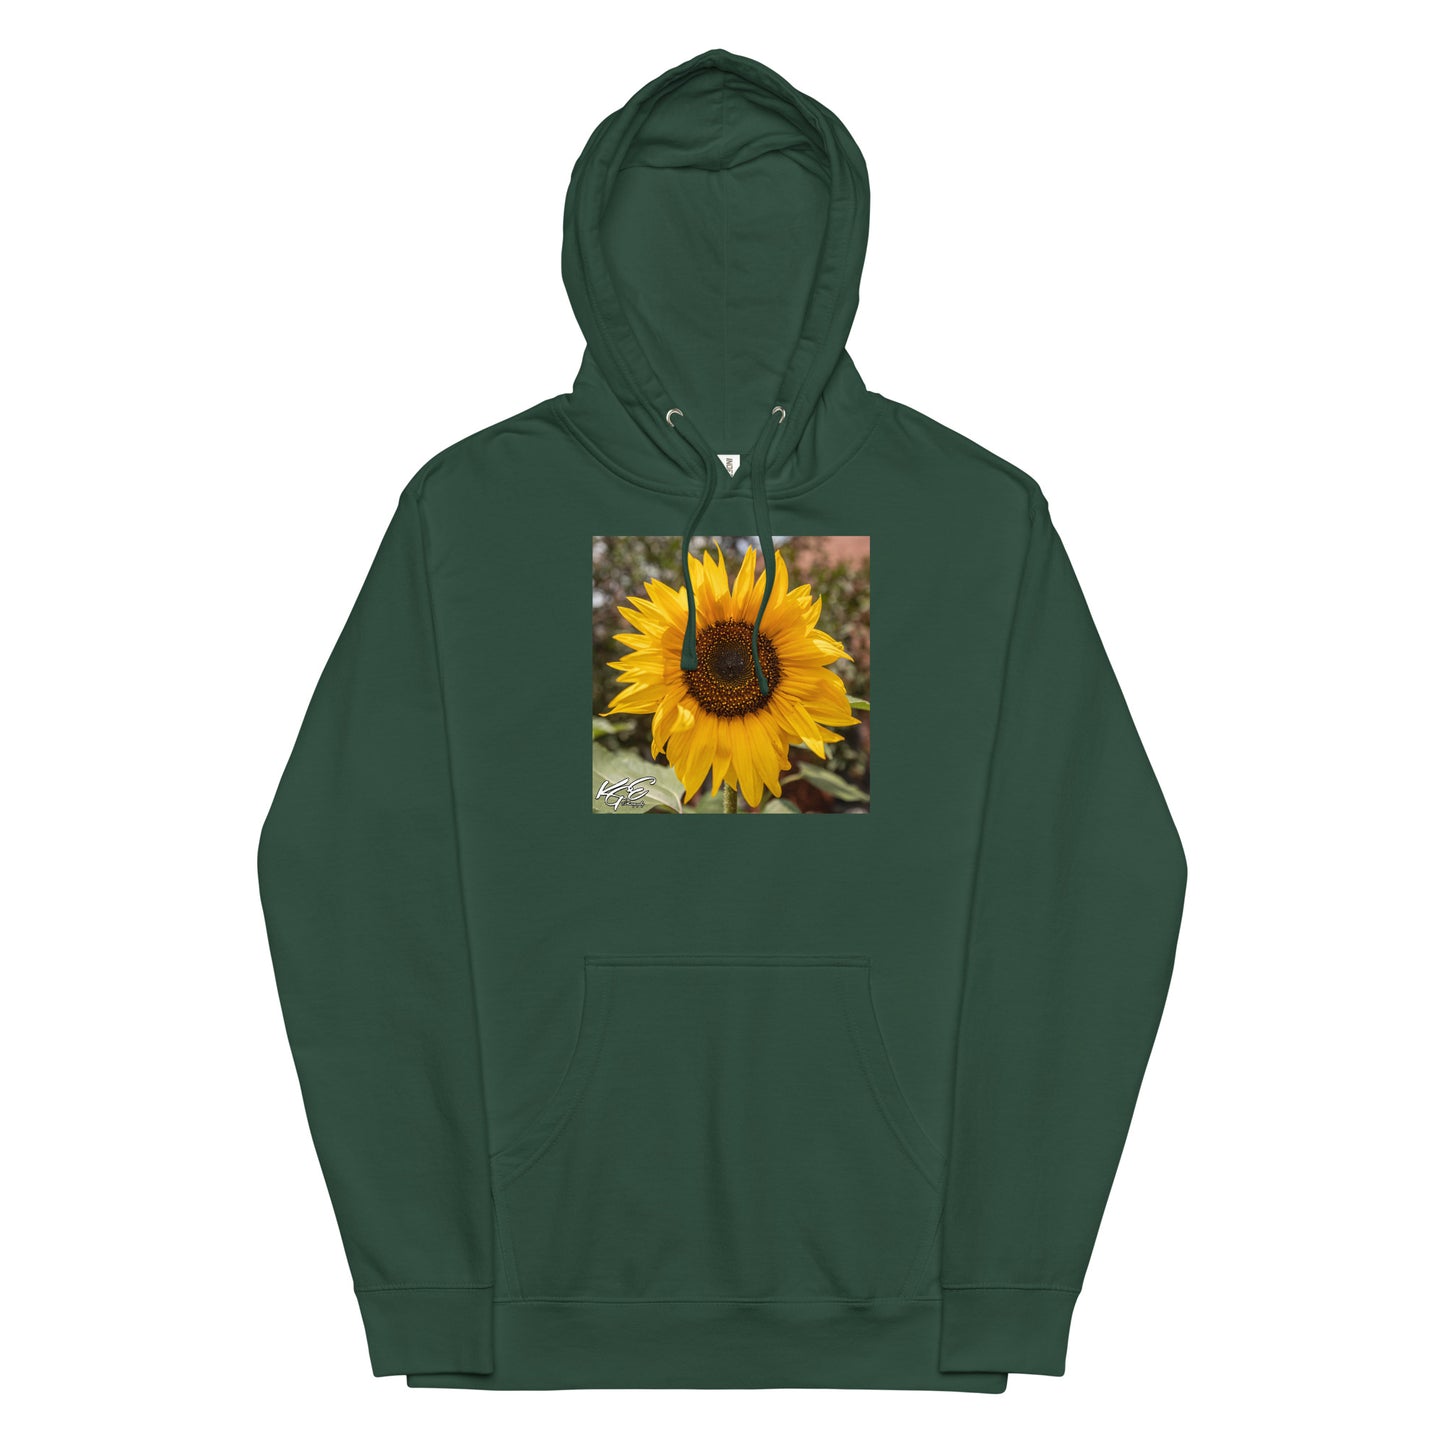 (New) KGE Photography | Sunflower | Unisex midweight Independent hoodie